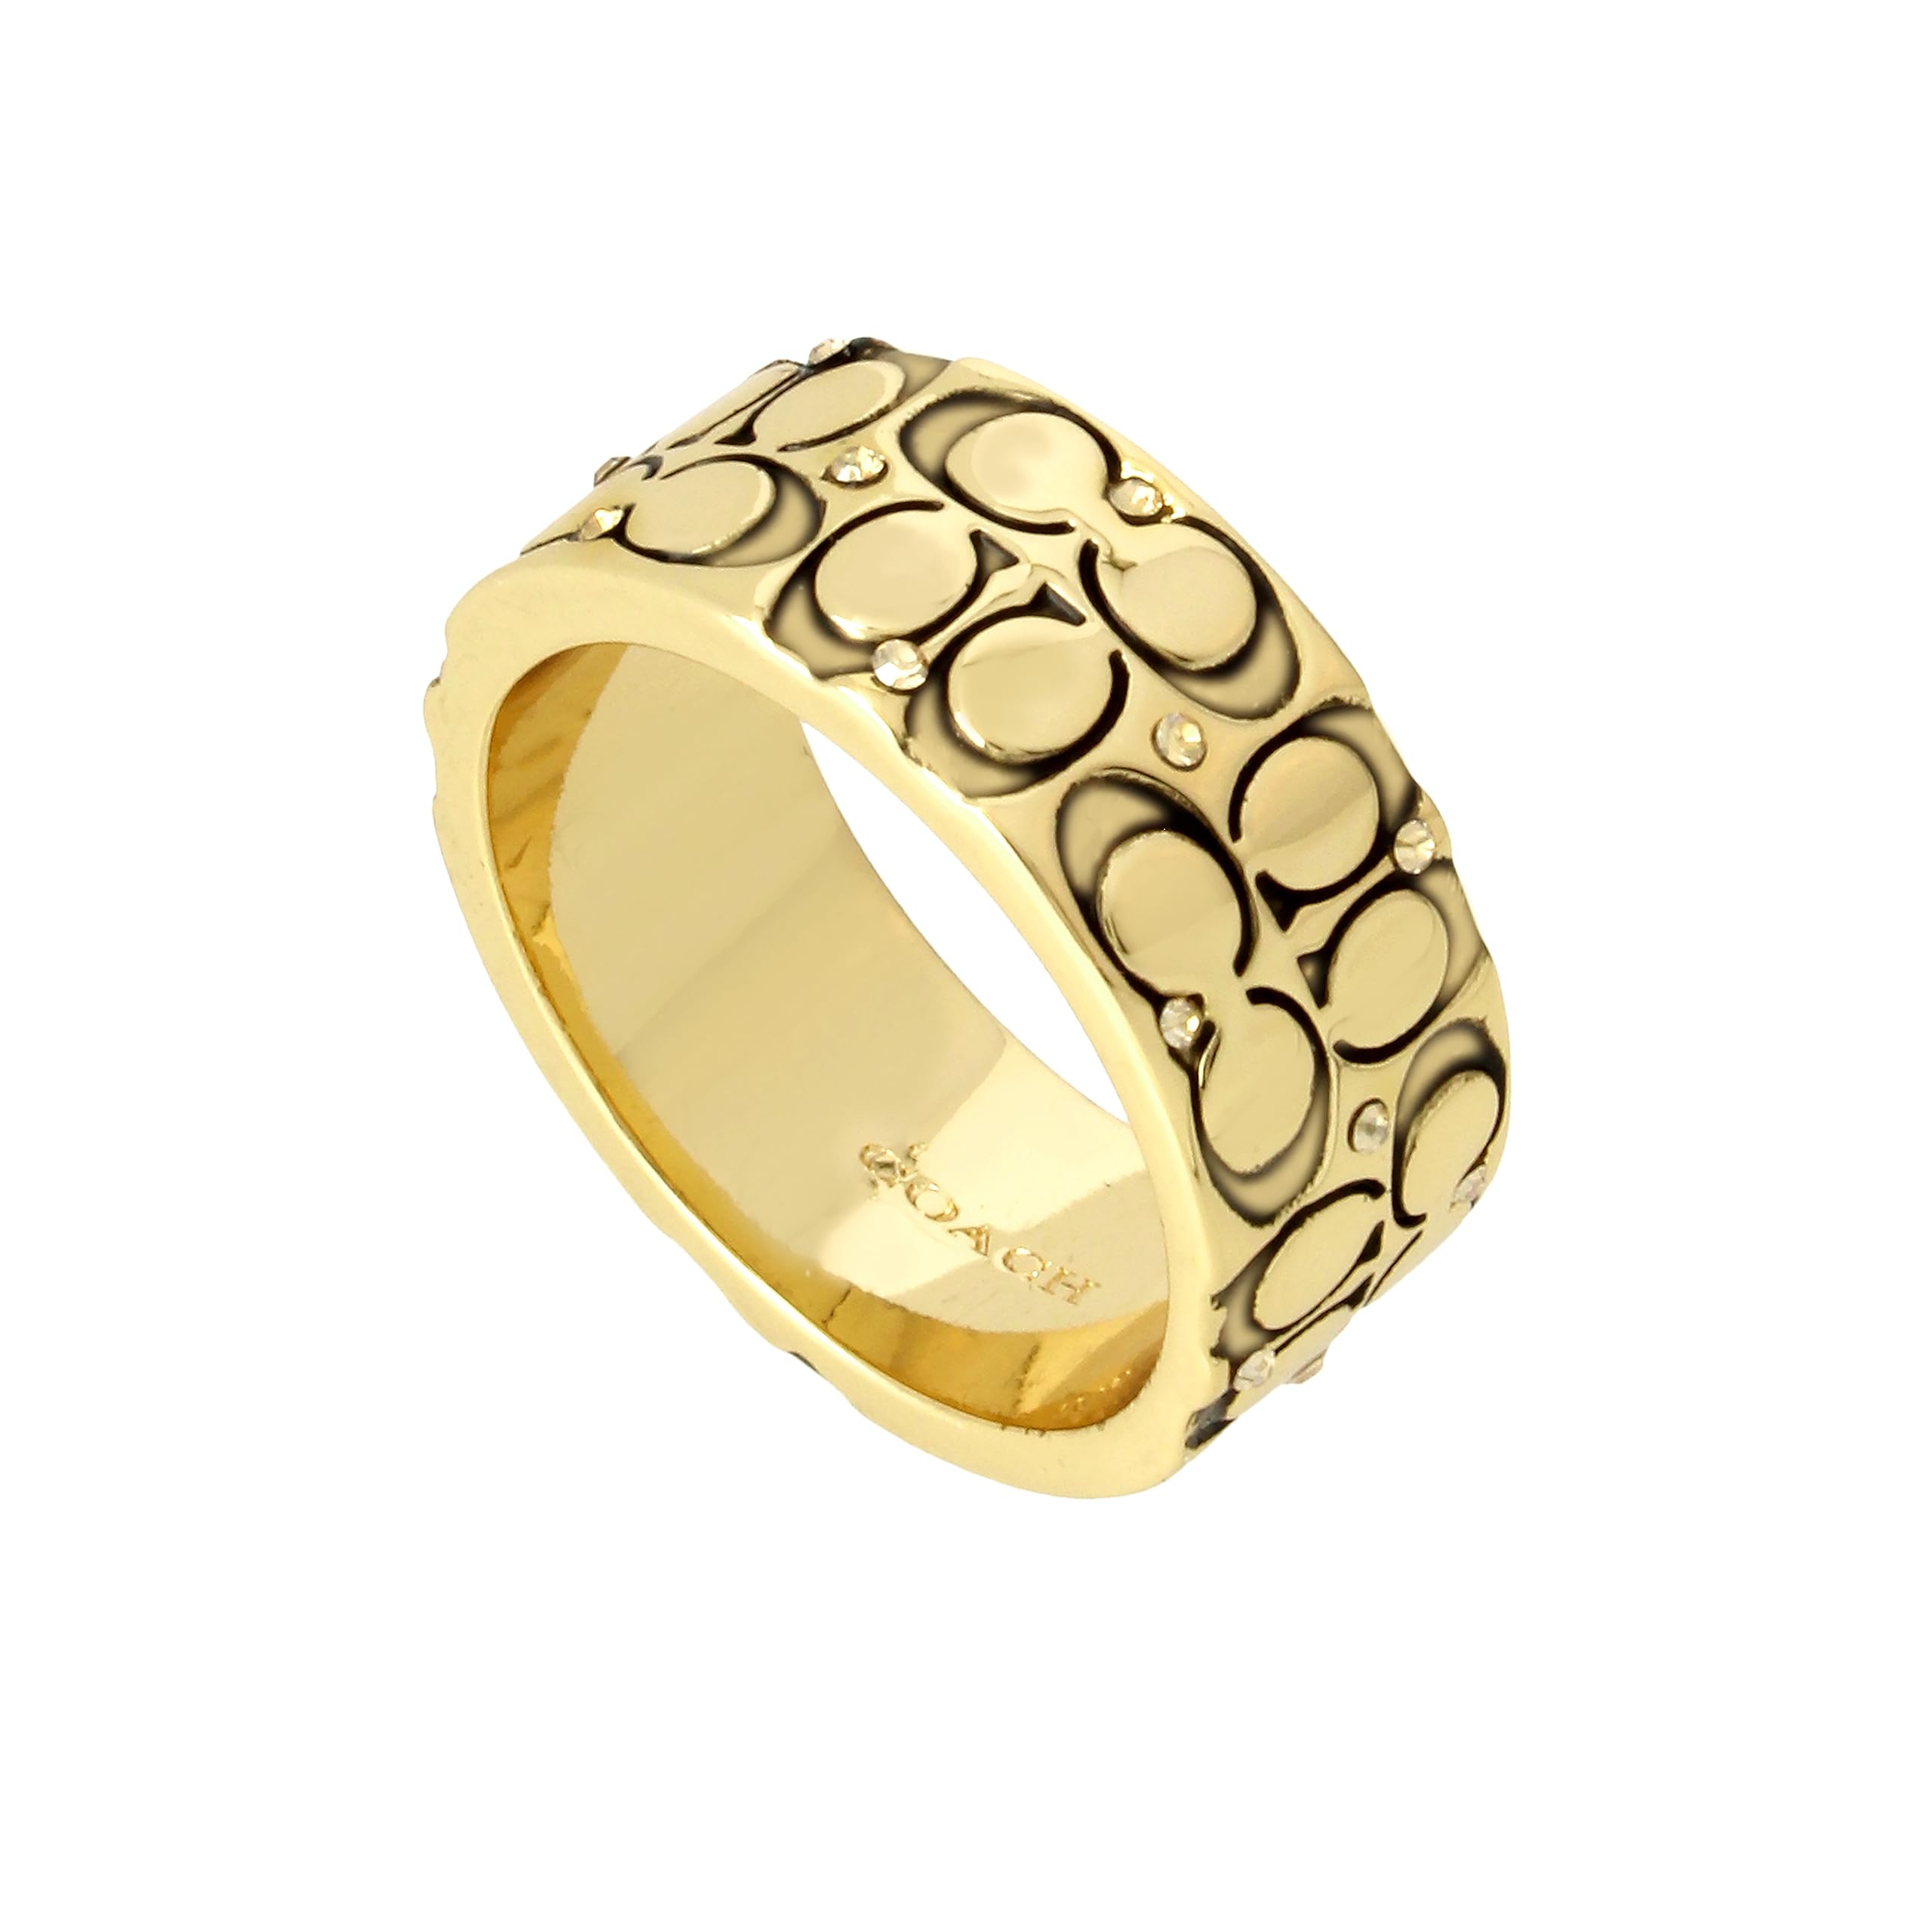 Coach Women's Signature Logo Quilted Band Ring